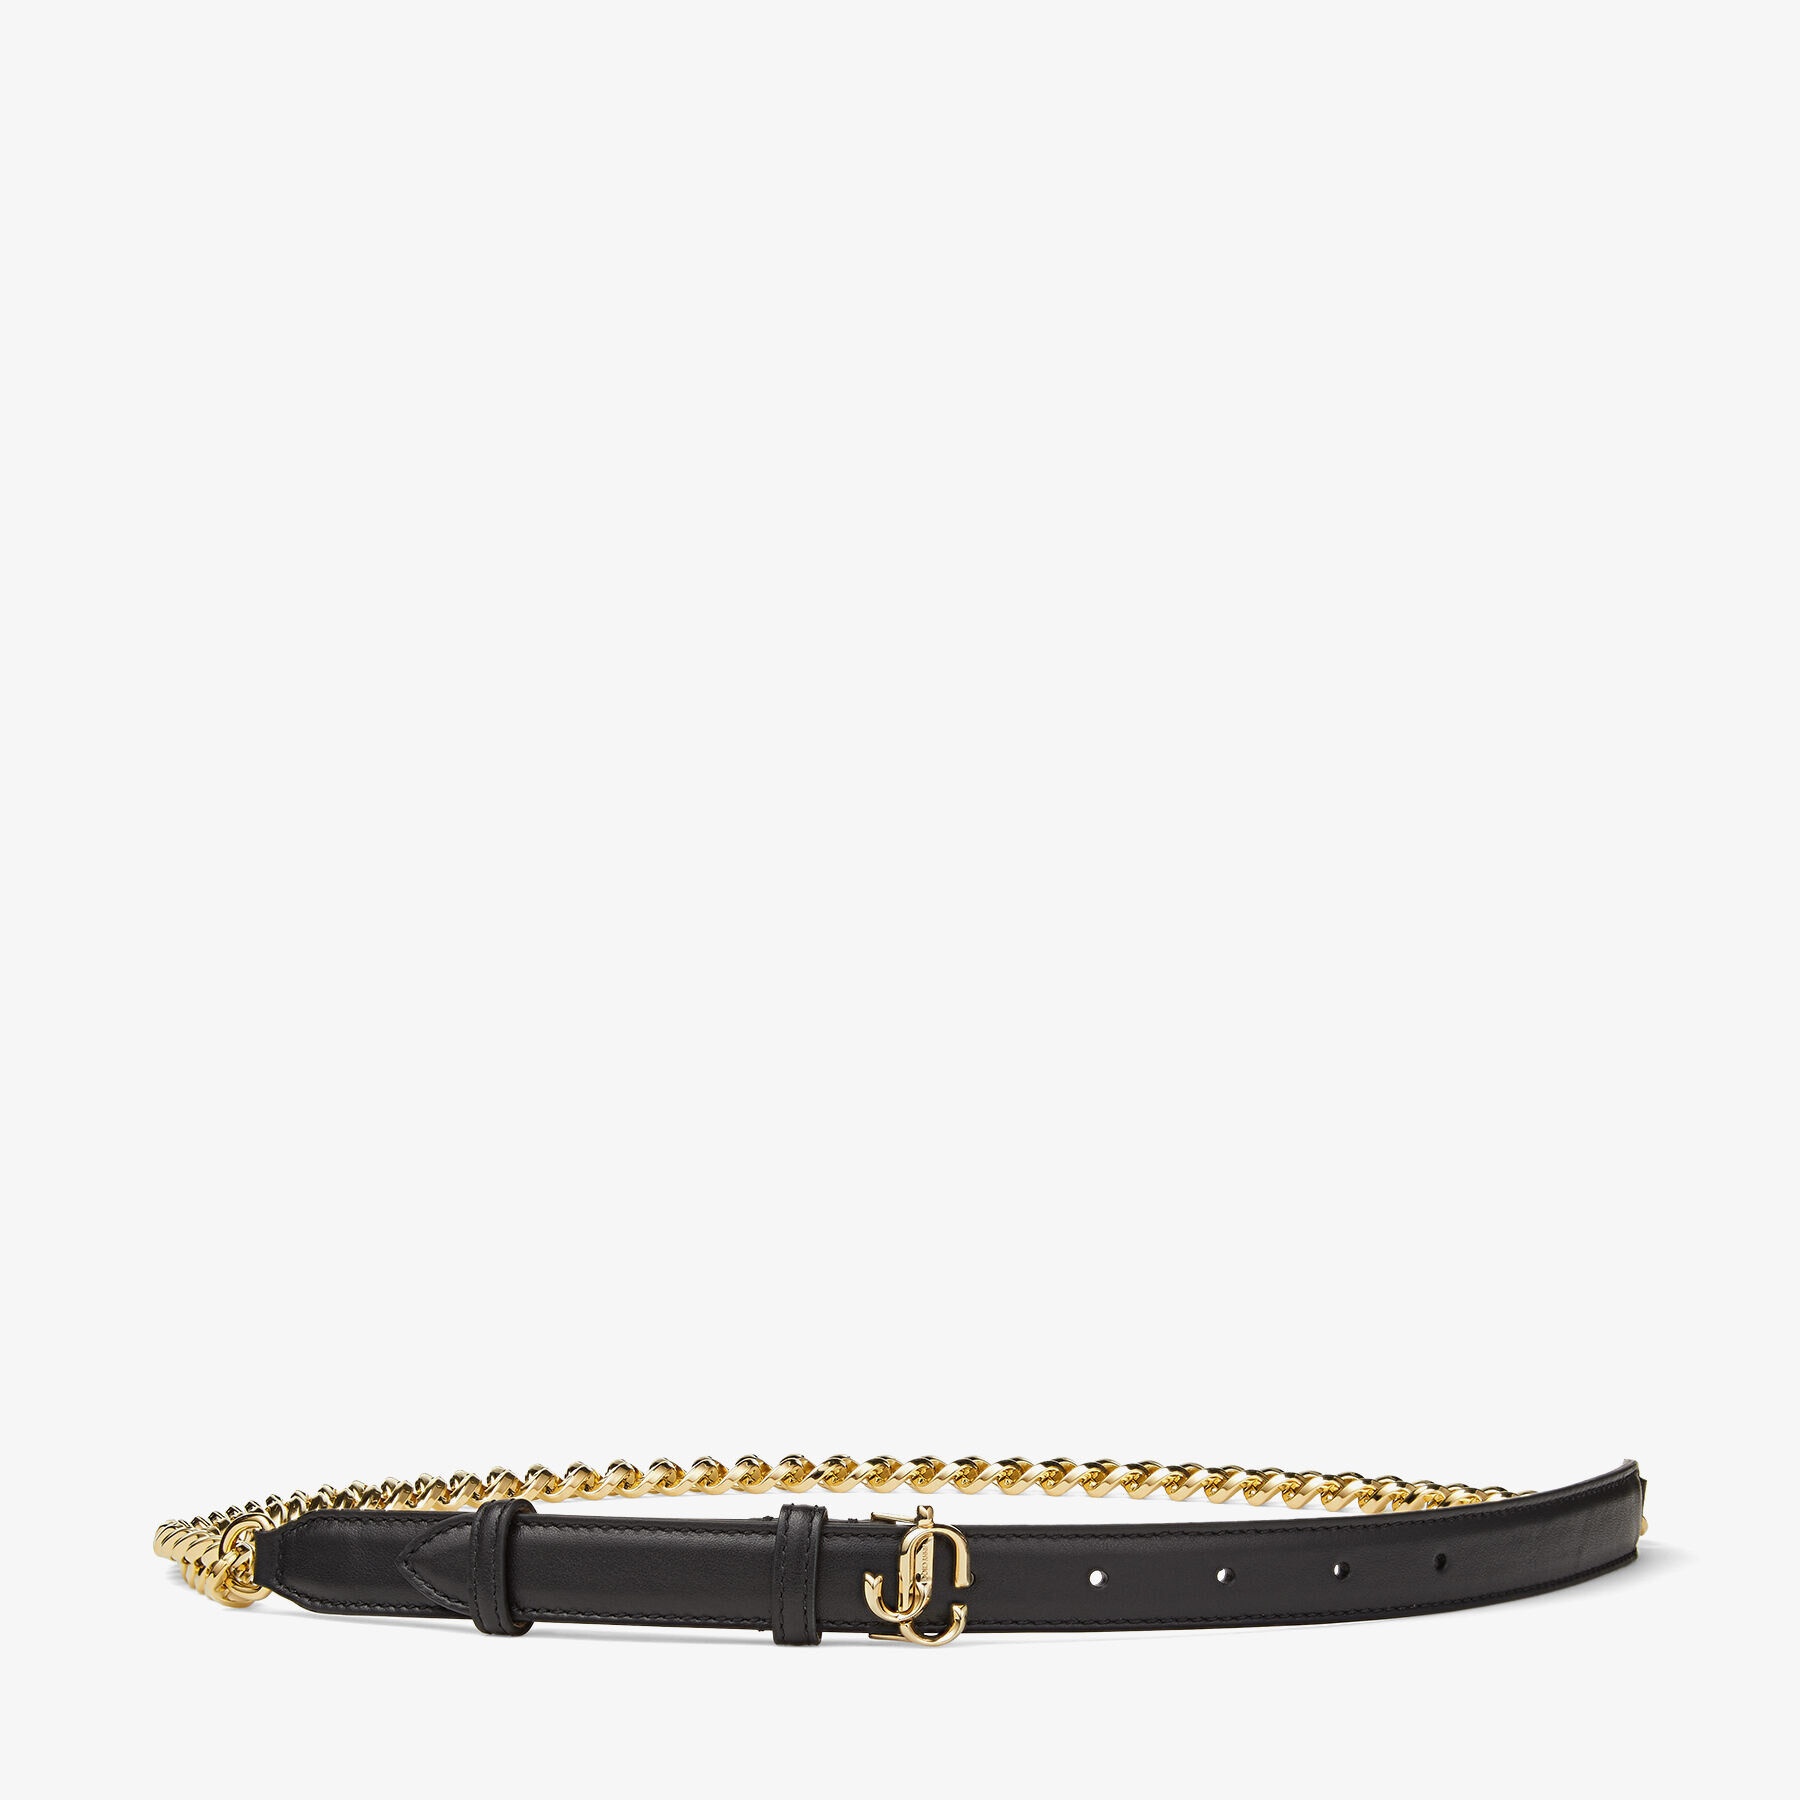 JC Chain
Black Soft Shiny Calf Leather and Chain Belt with Light Gold JC Emblem - 1